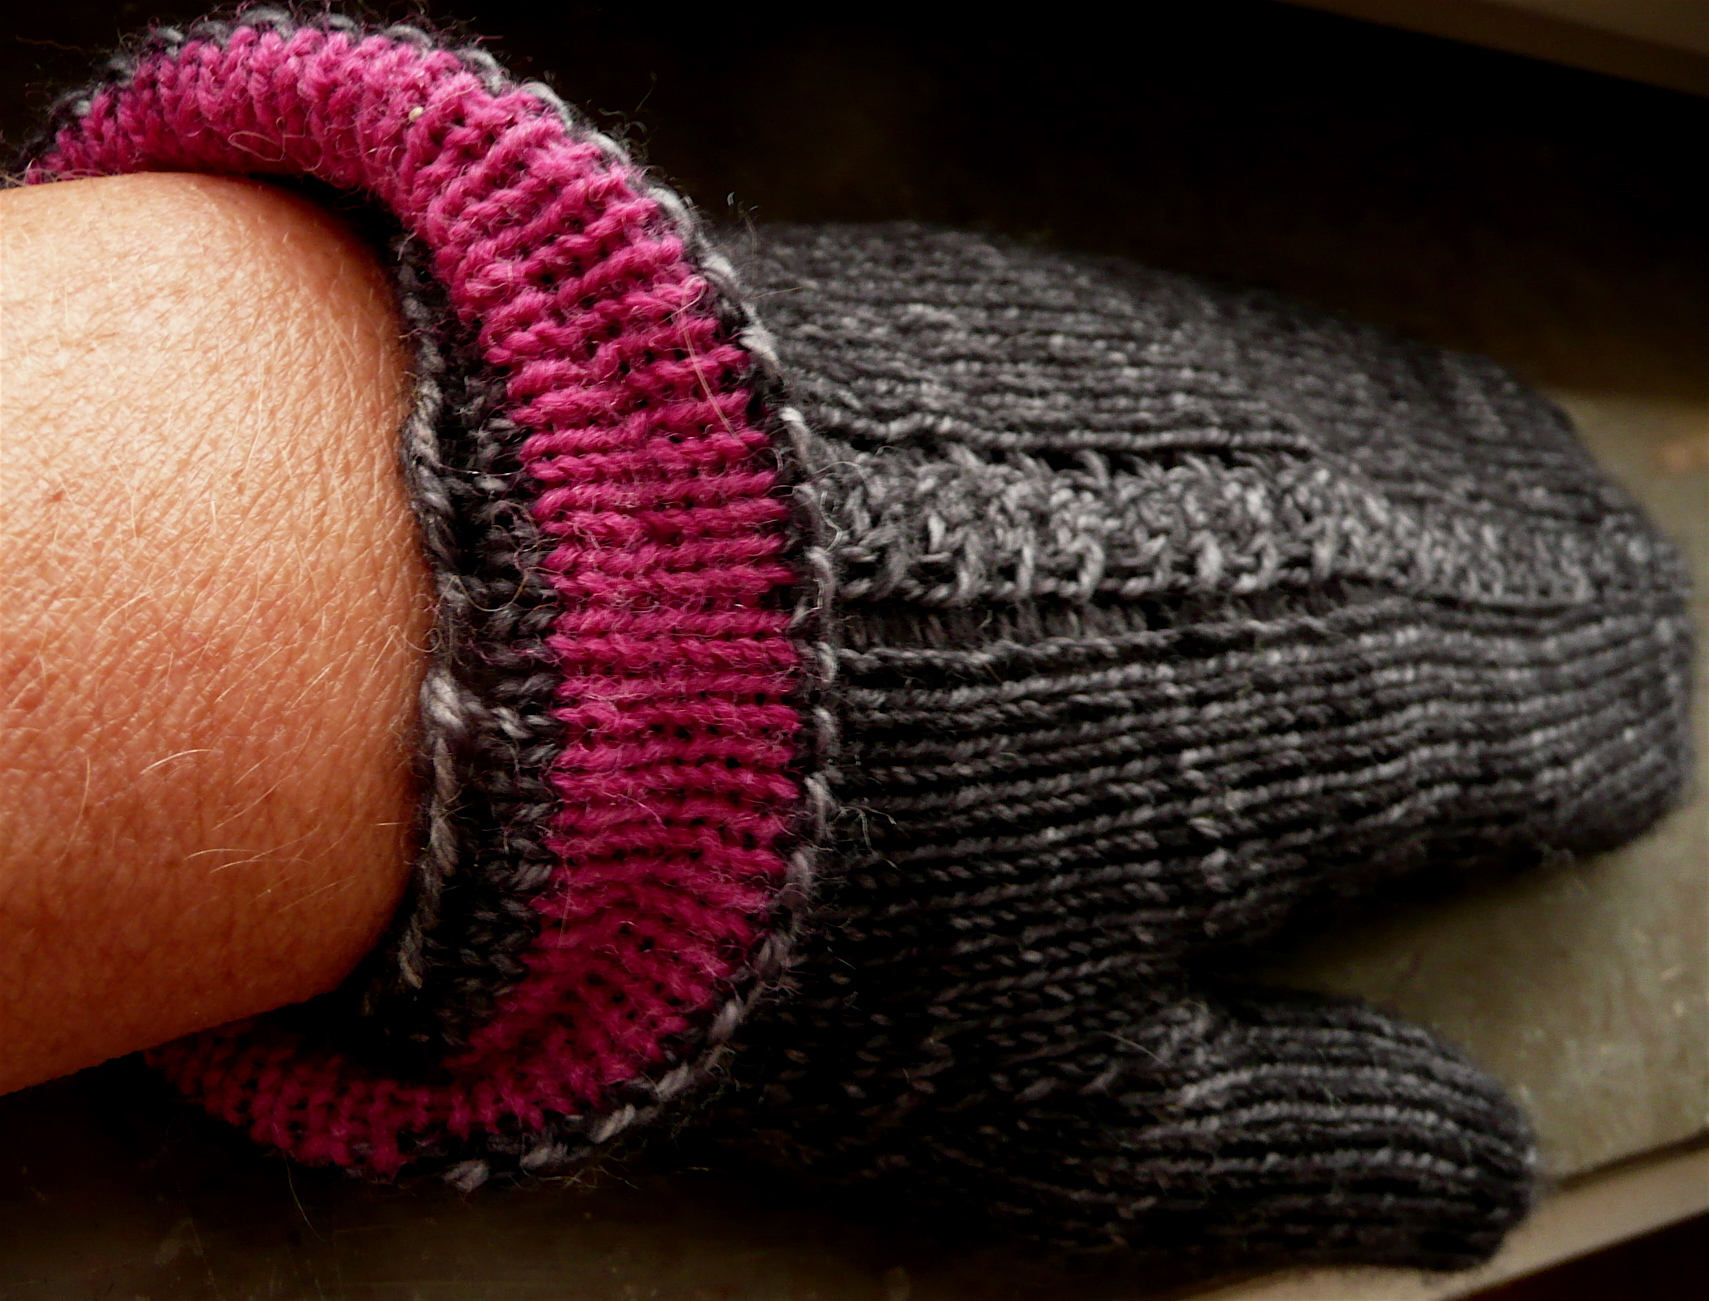 someone holding their arm with a hand knitted wrist warmer